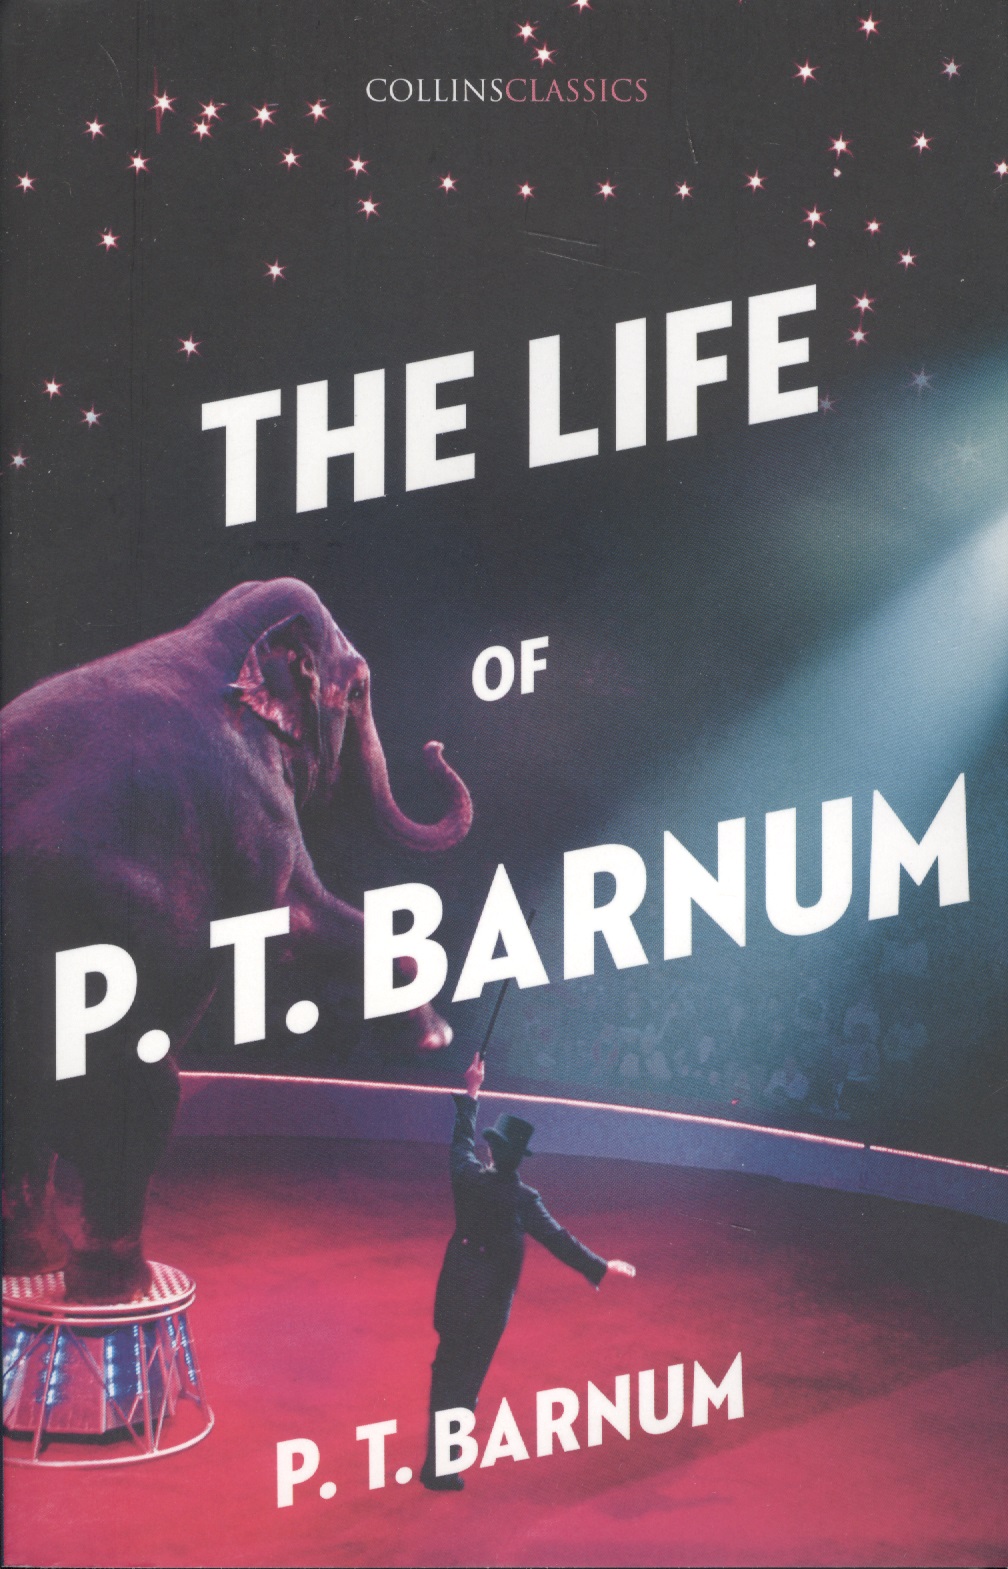 The Life of P.T. Barnum  the greatest showman for her духи 75мл уценка